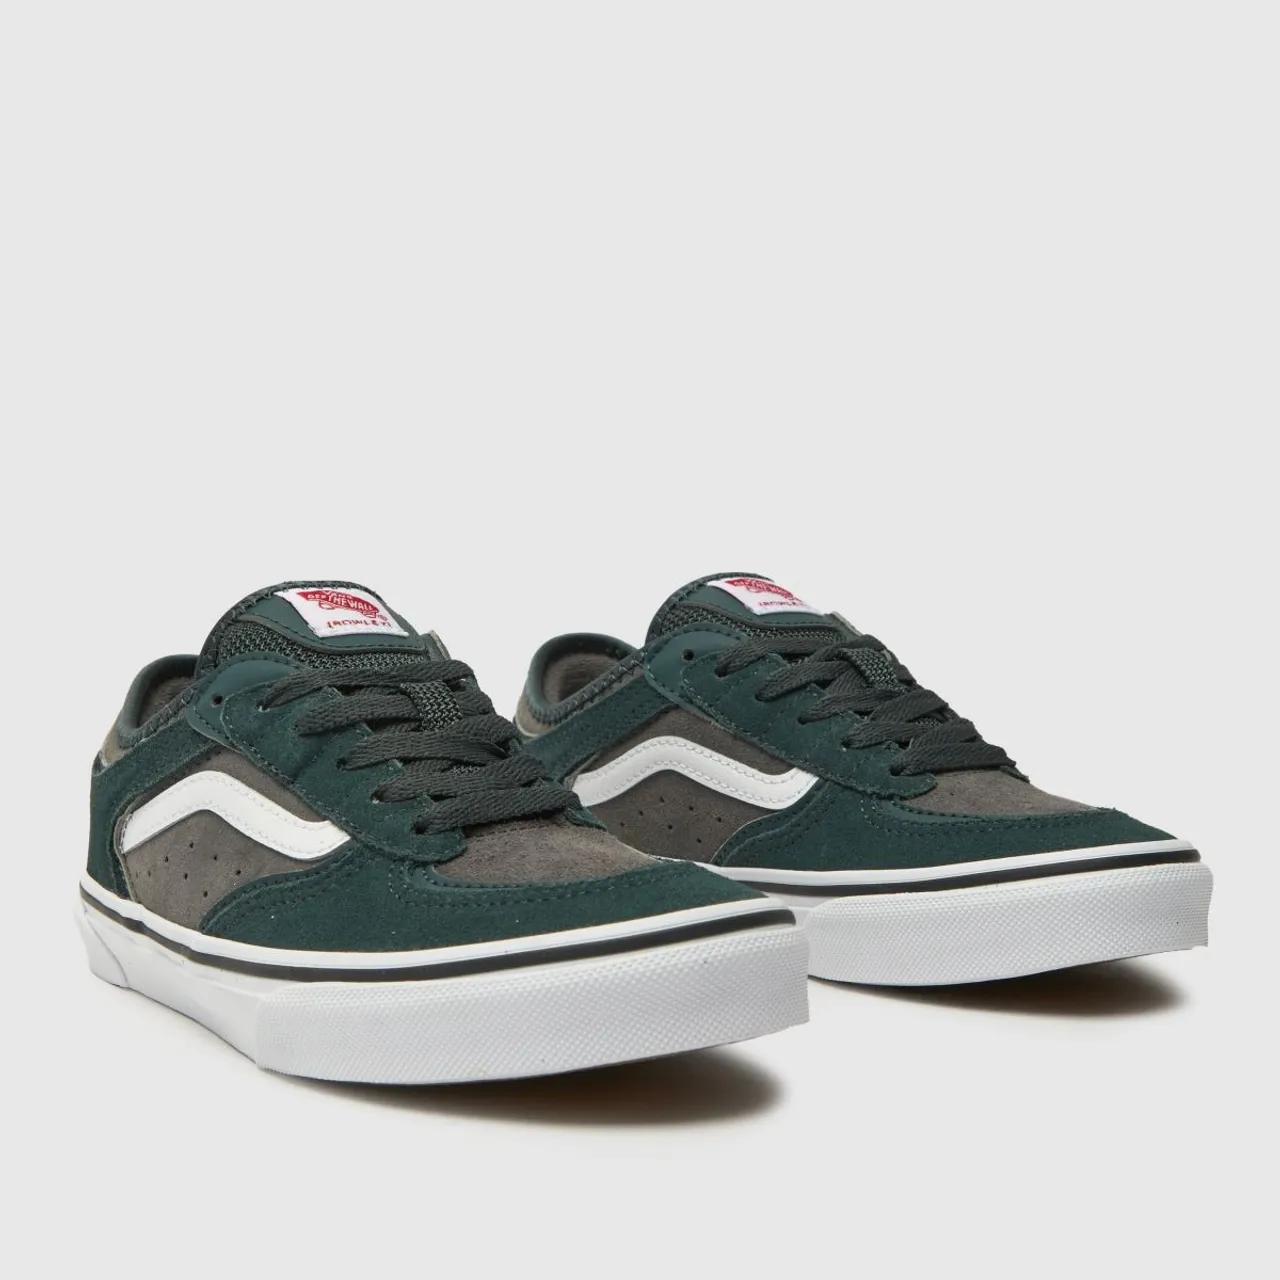 Vans Dark Green Rowley Classic Youth Trainers